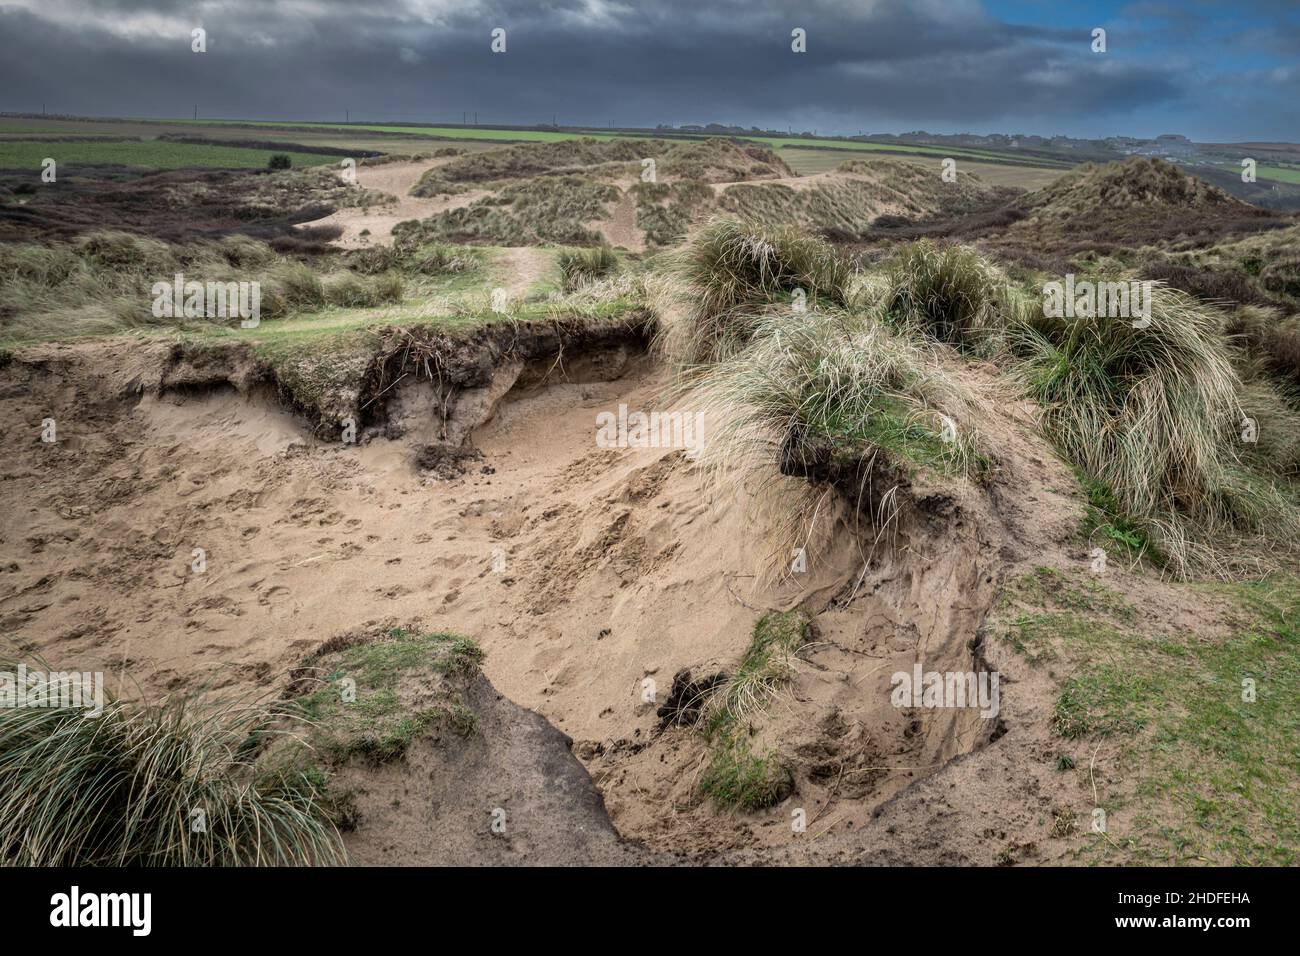 Serious damage cause by human activity to the fragile delicate sand dune system at Crantock Beach in Newquay in Cornwall. Stock Photo